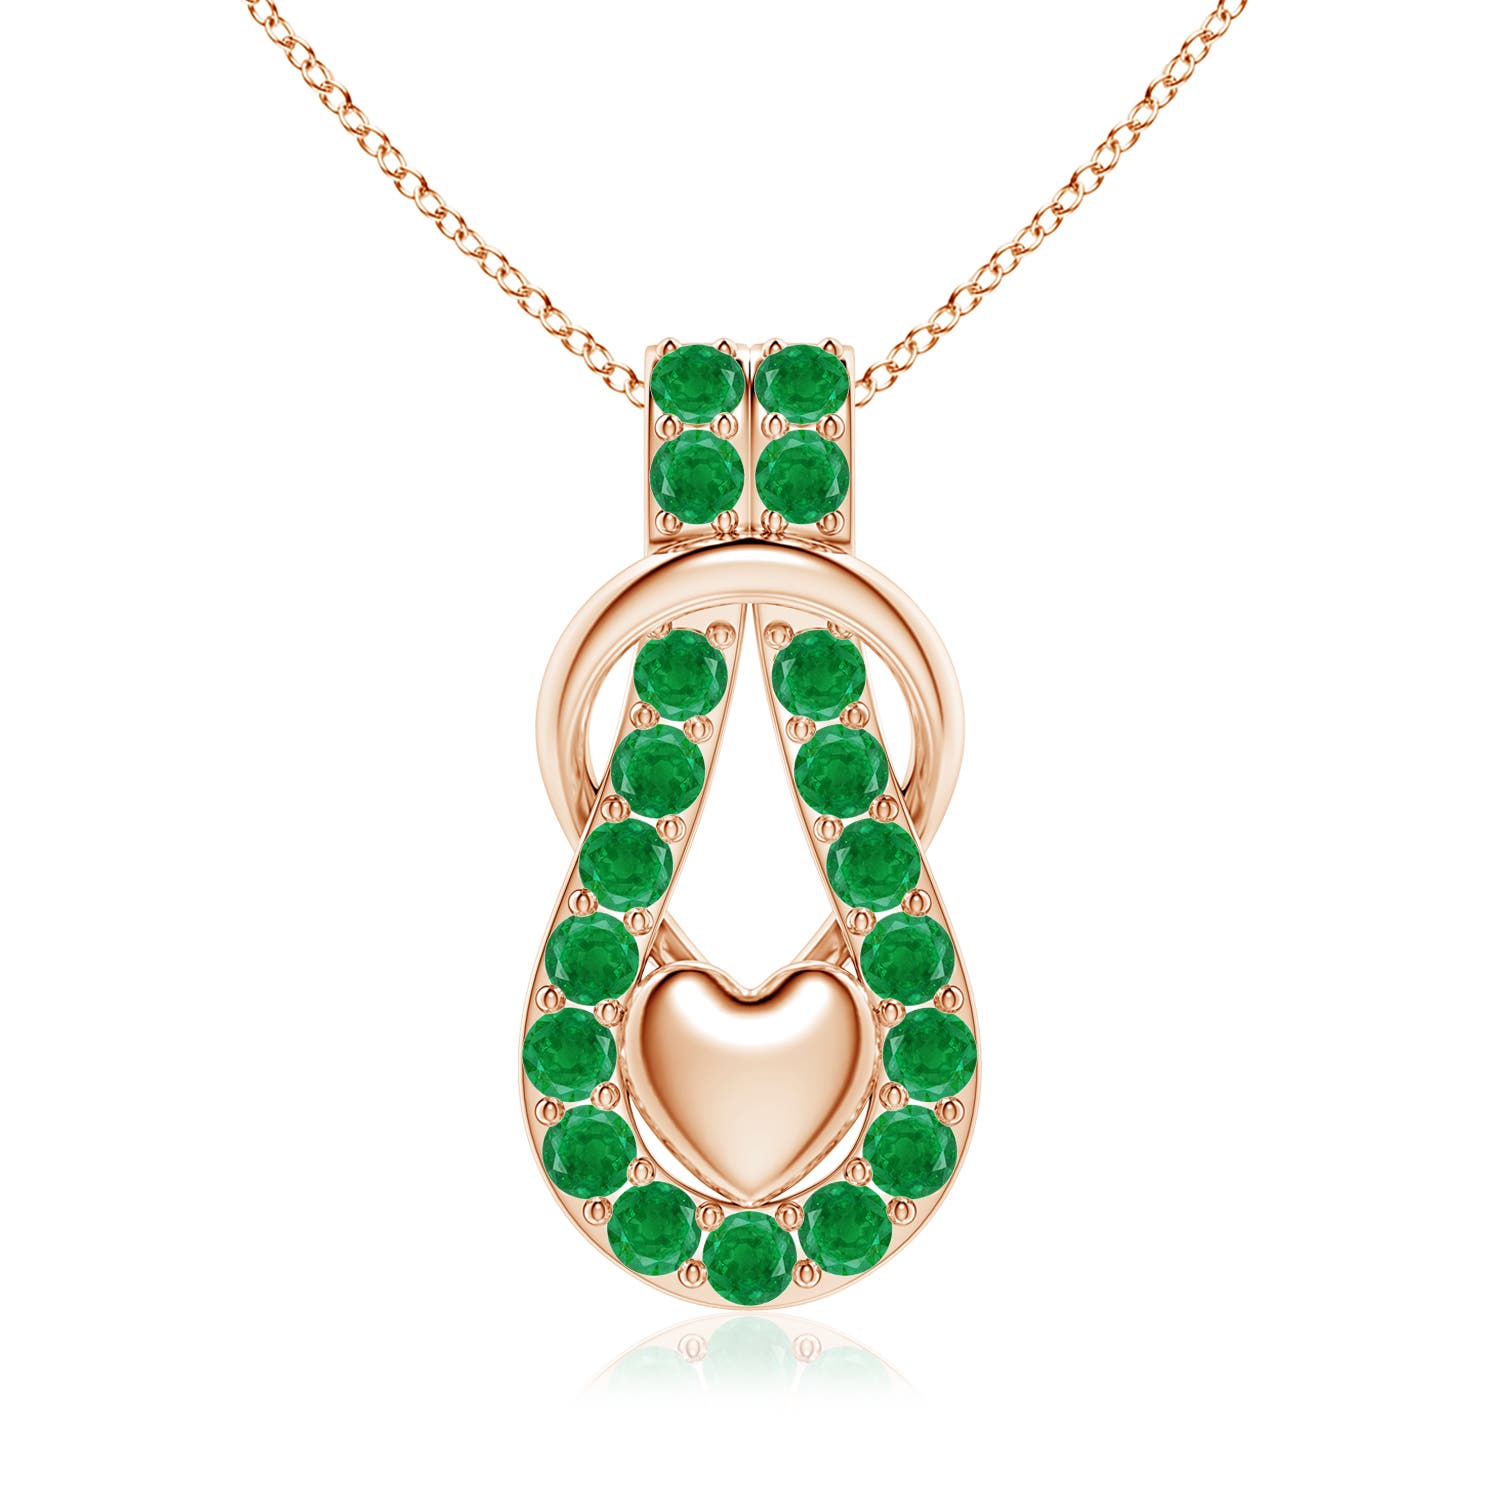 AA - Emerald / 2.85 CT / 18 KT Rose Gold